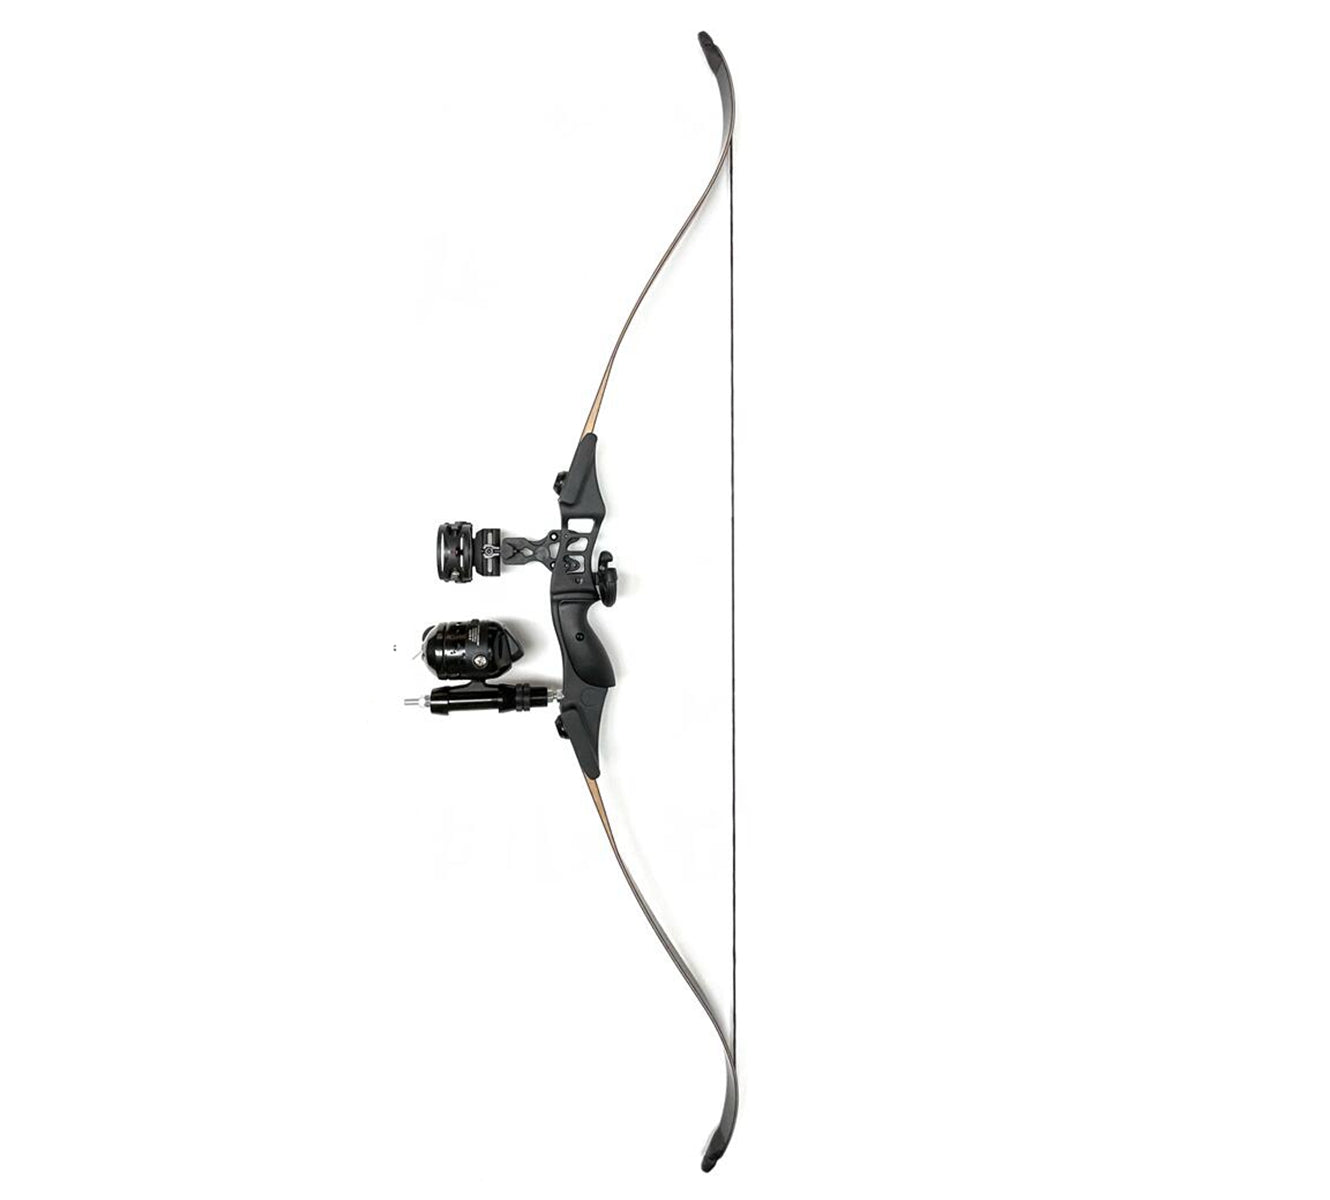 Archquick Bow fishing Bow Kit Recurve Bow Ready to Shoot Bowfishing 30-50lbs